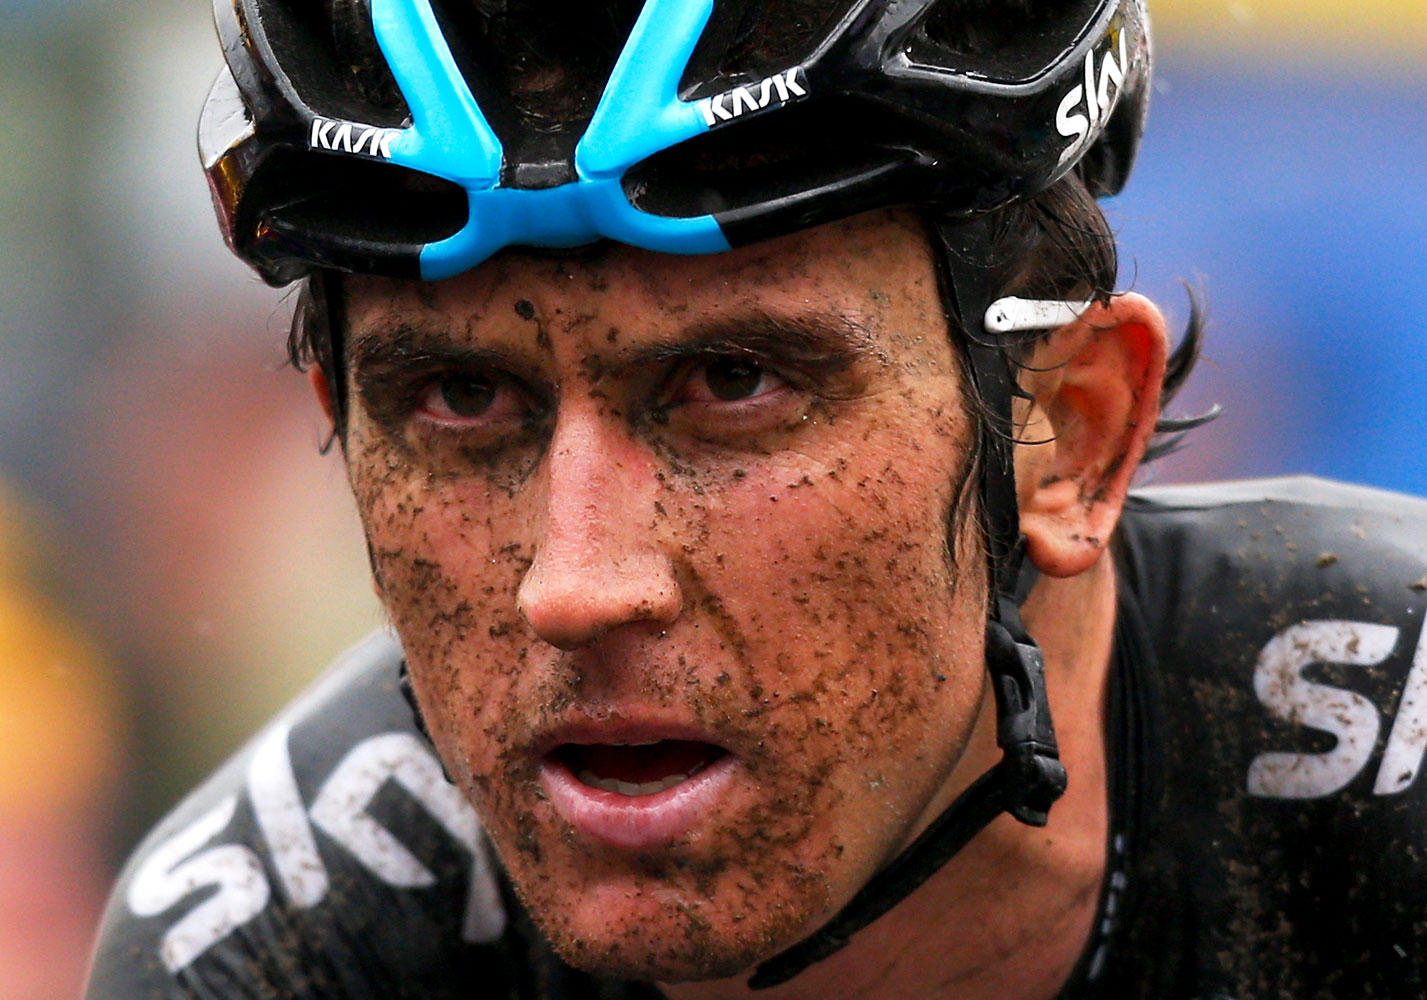 Geraint Thomas of Great Britain crosses the finish line during the fifth stage of the 2014 Tour de France, a 155km stage between Ypres and Arenberg Porte du Hainaut, on July 9, 2014 in Ypres, Belgium.